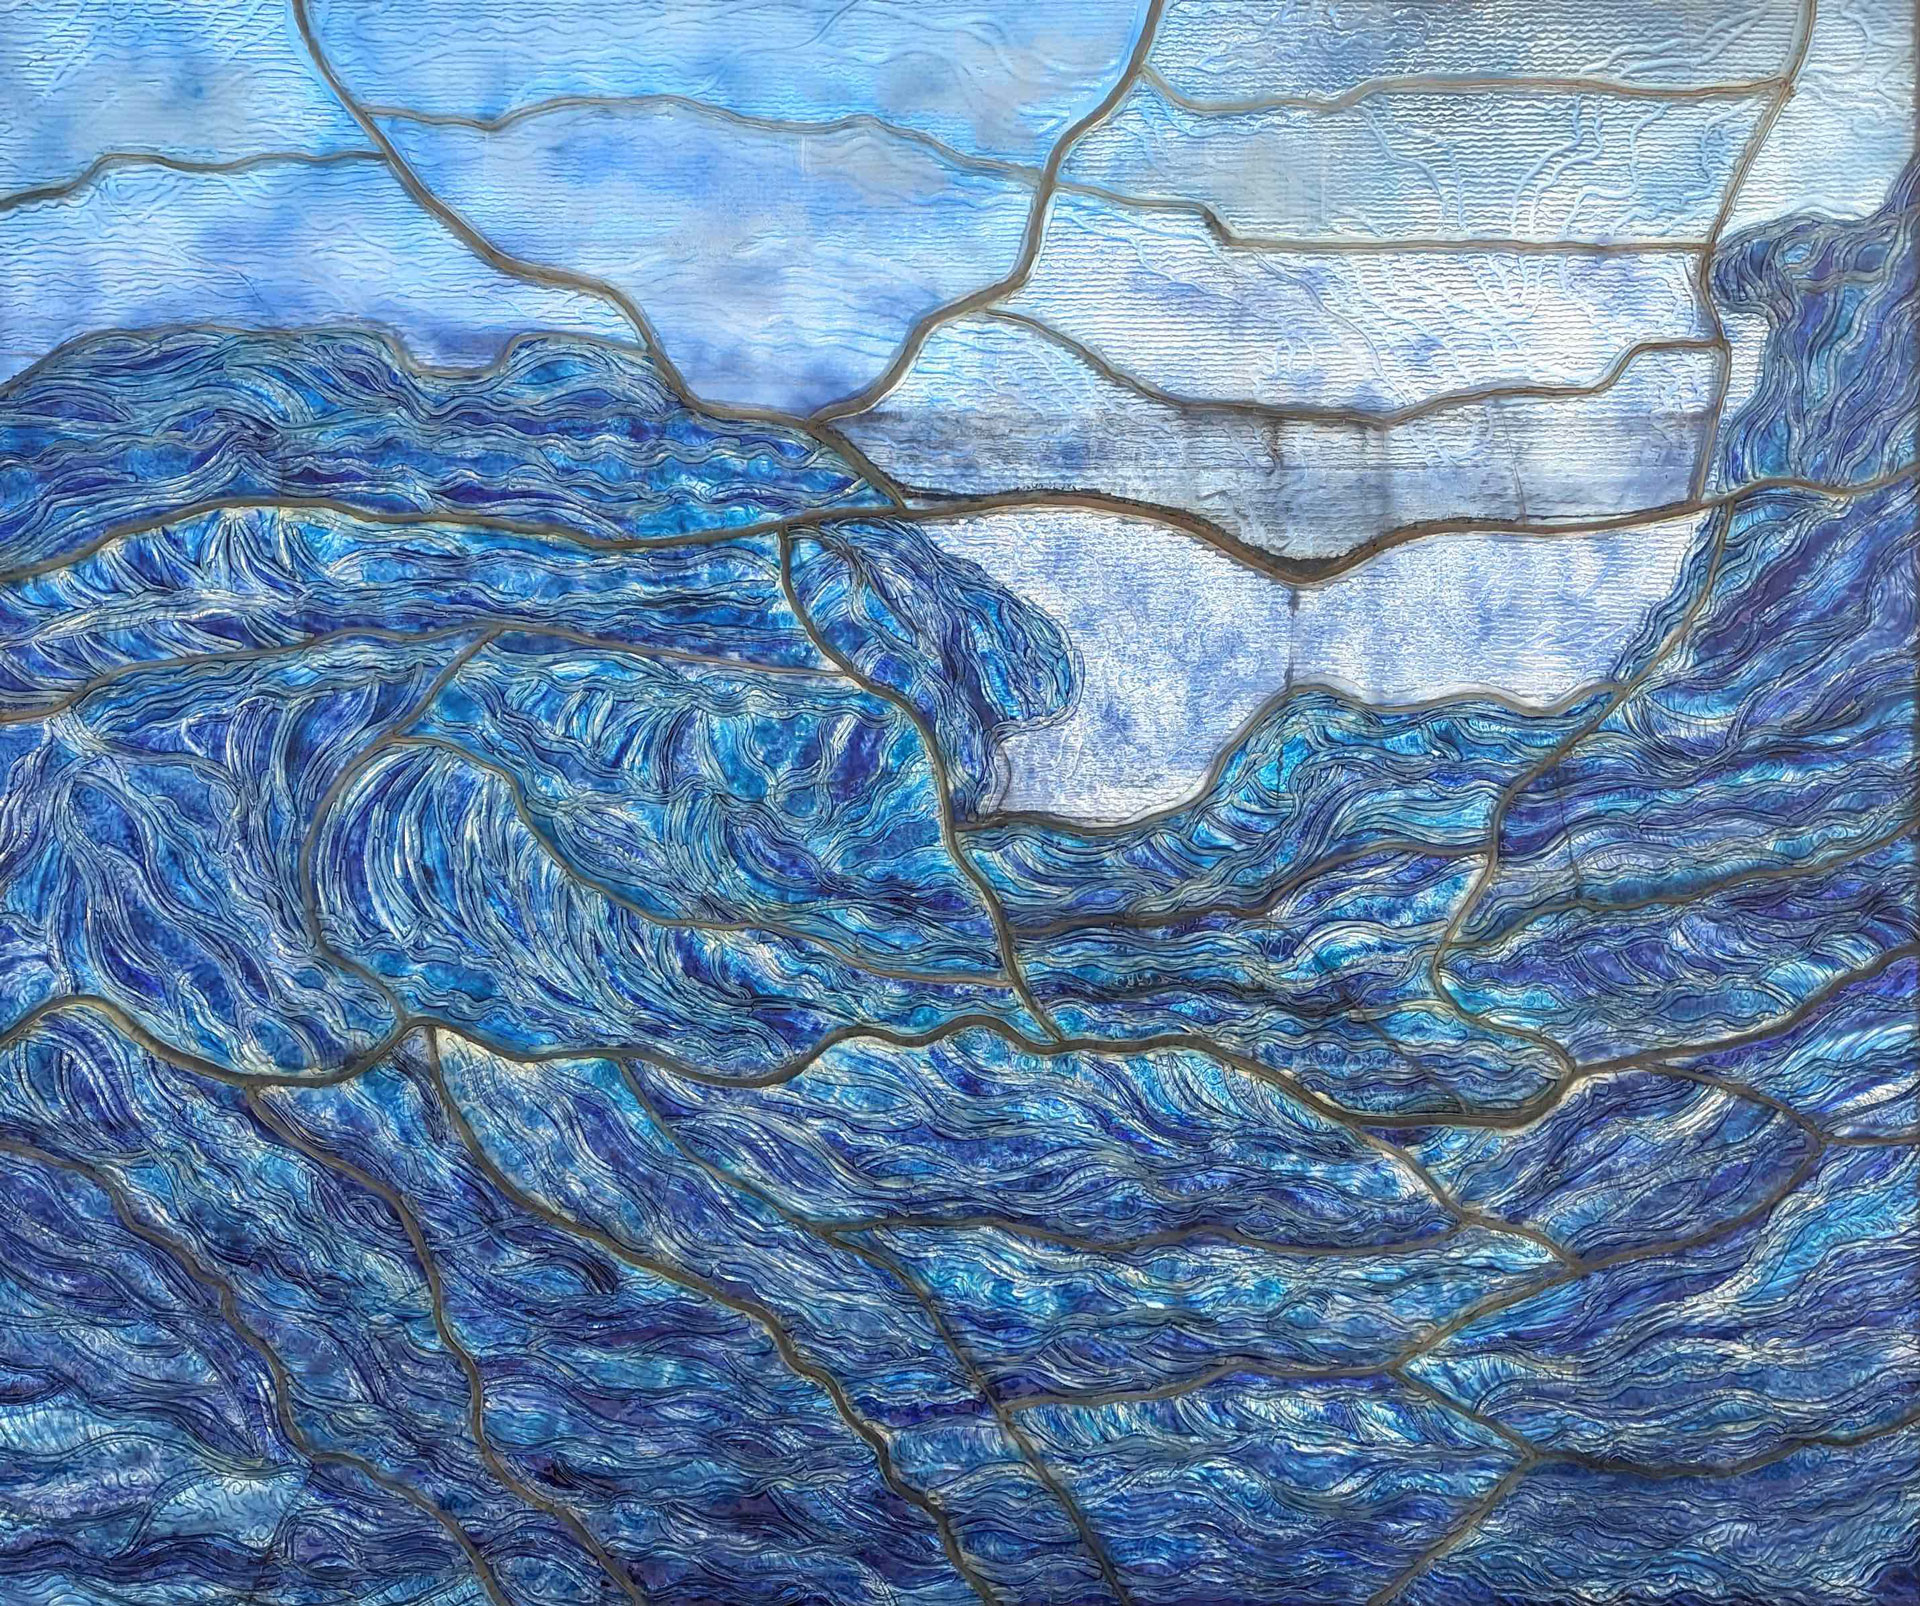 A stained glass window depicting a dynamic ocean scene. The glass pieces are various shades of blue and white, intricately arranged to represent turbulent waves crashing against each other, emulating the movement and depth of the sea.